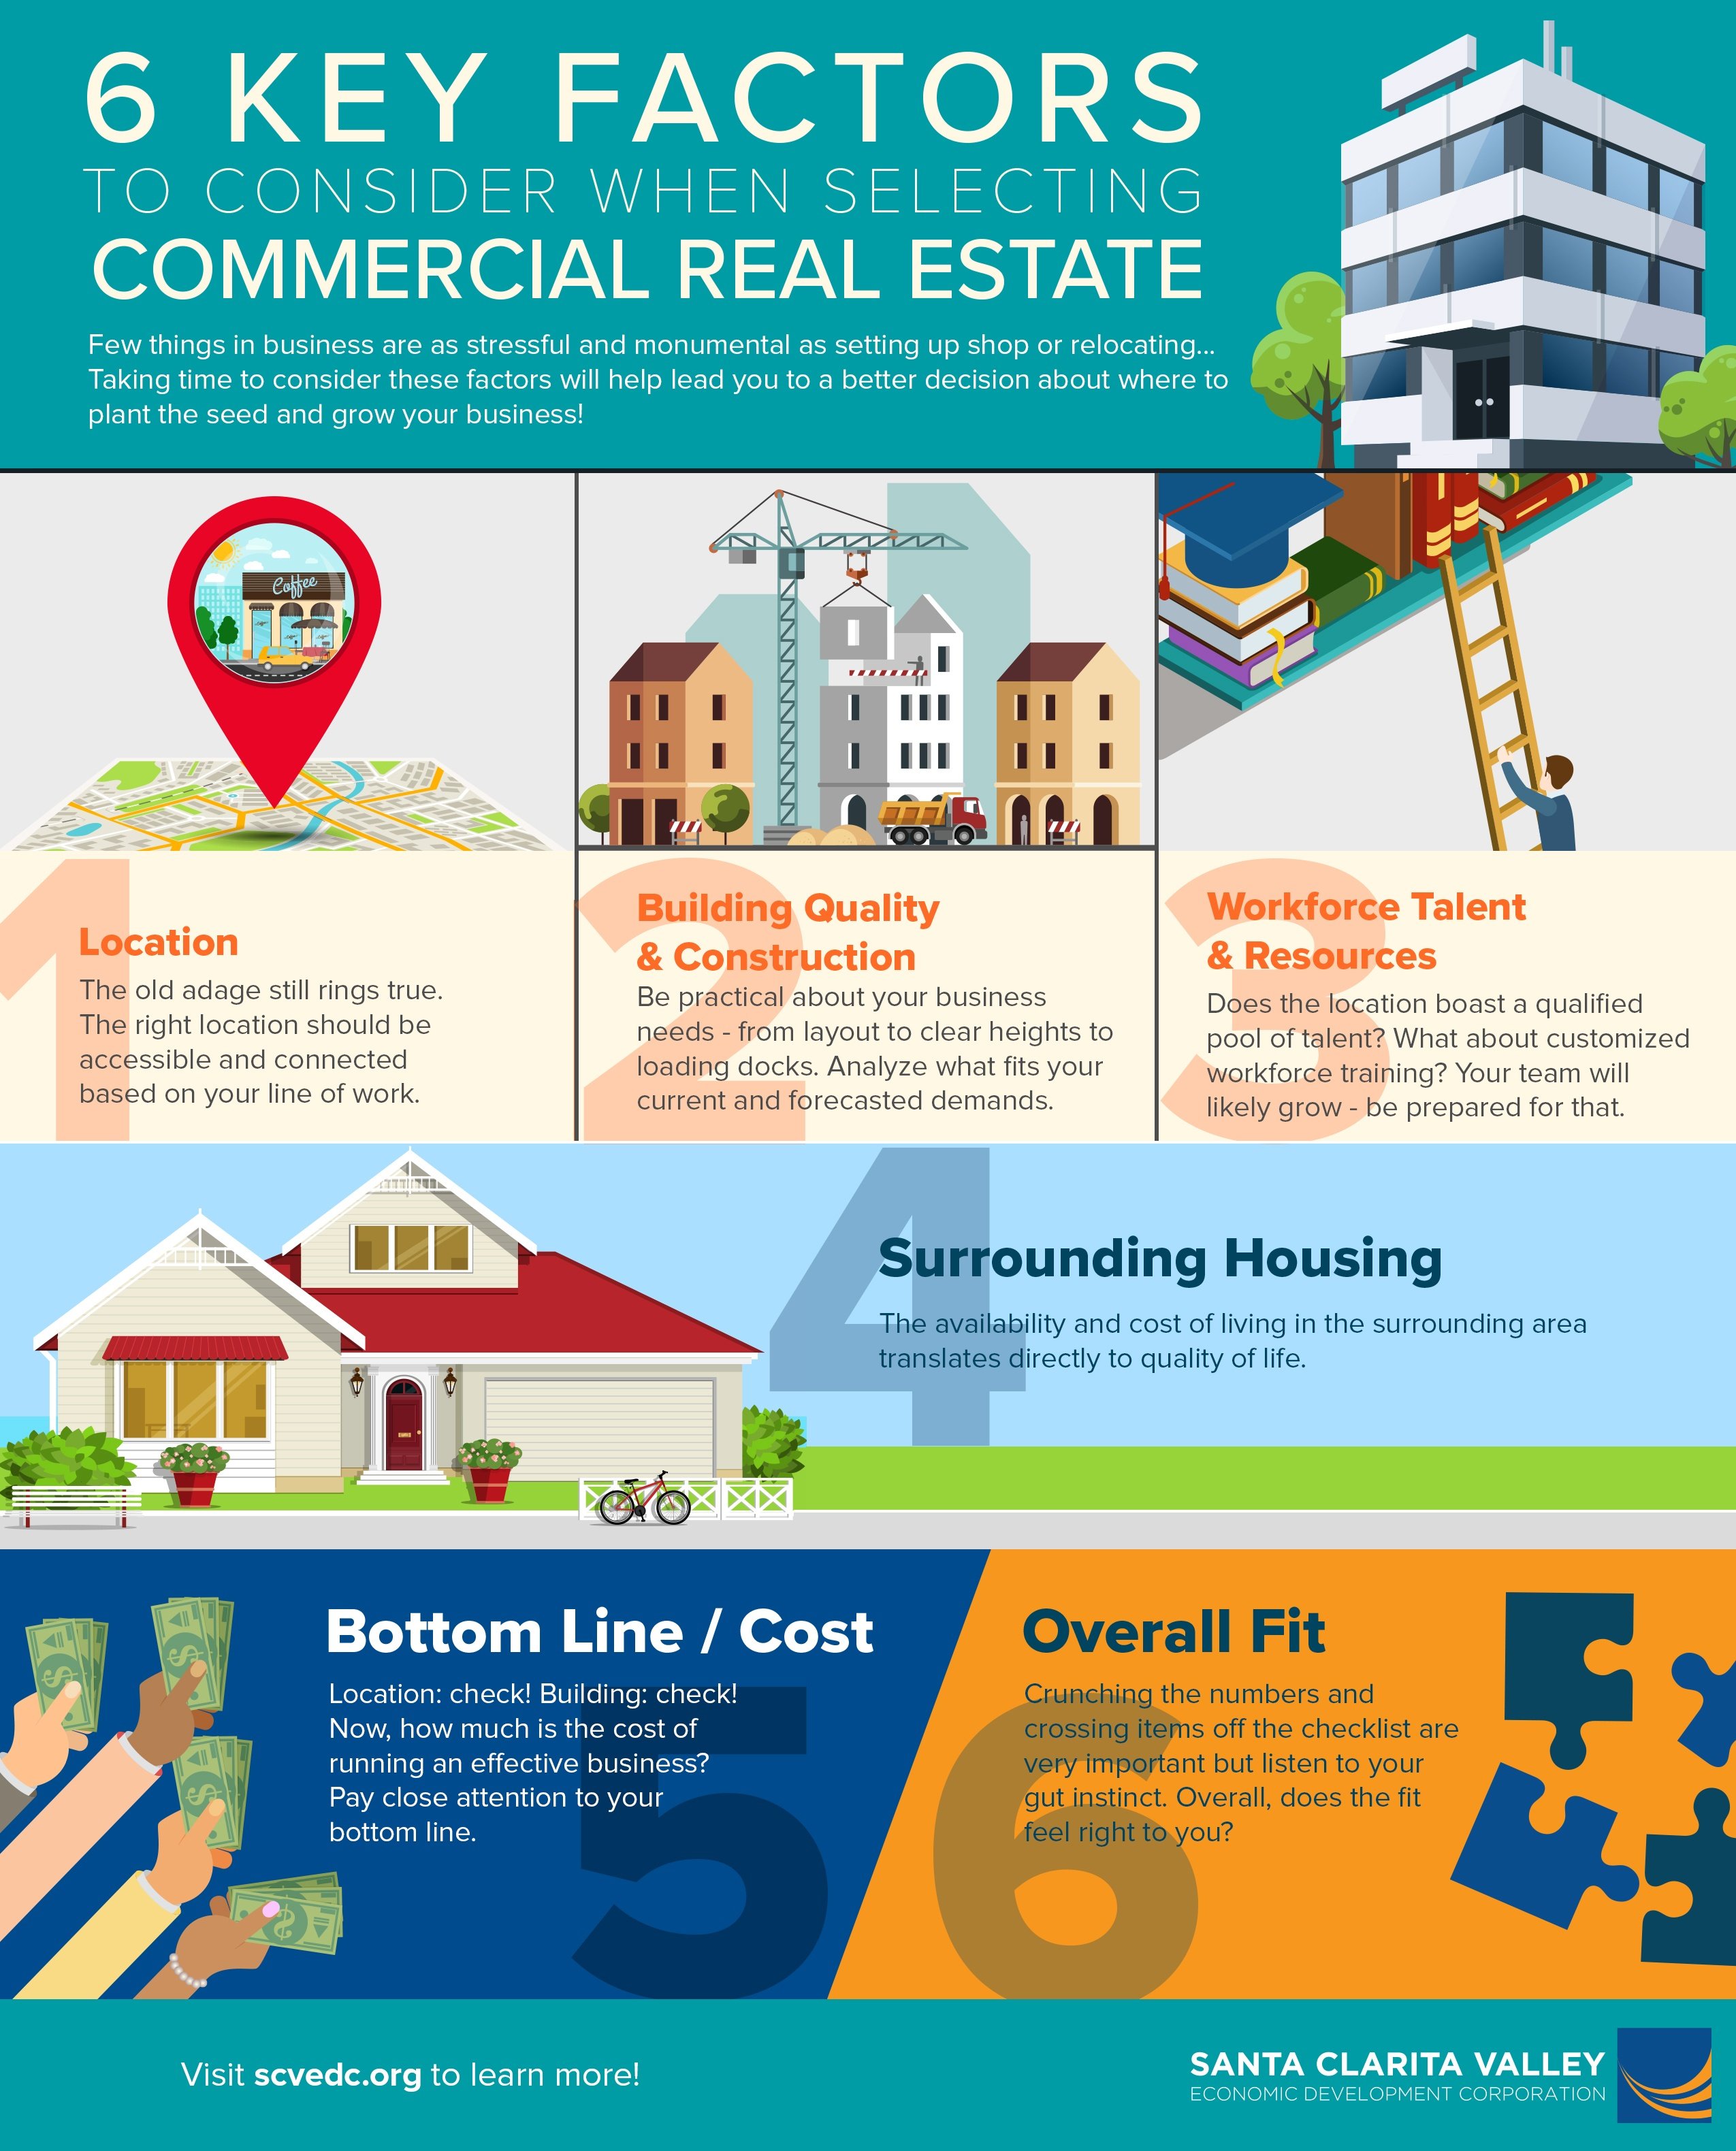 6 Key Factors to Consider When Selecting Commercial Real Estate